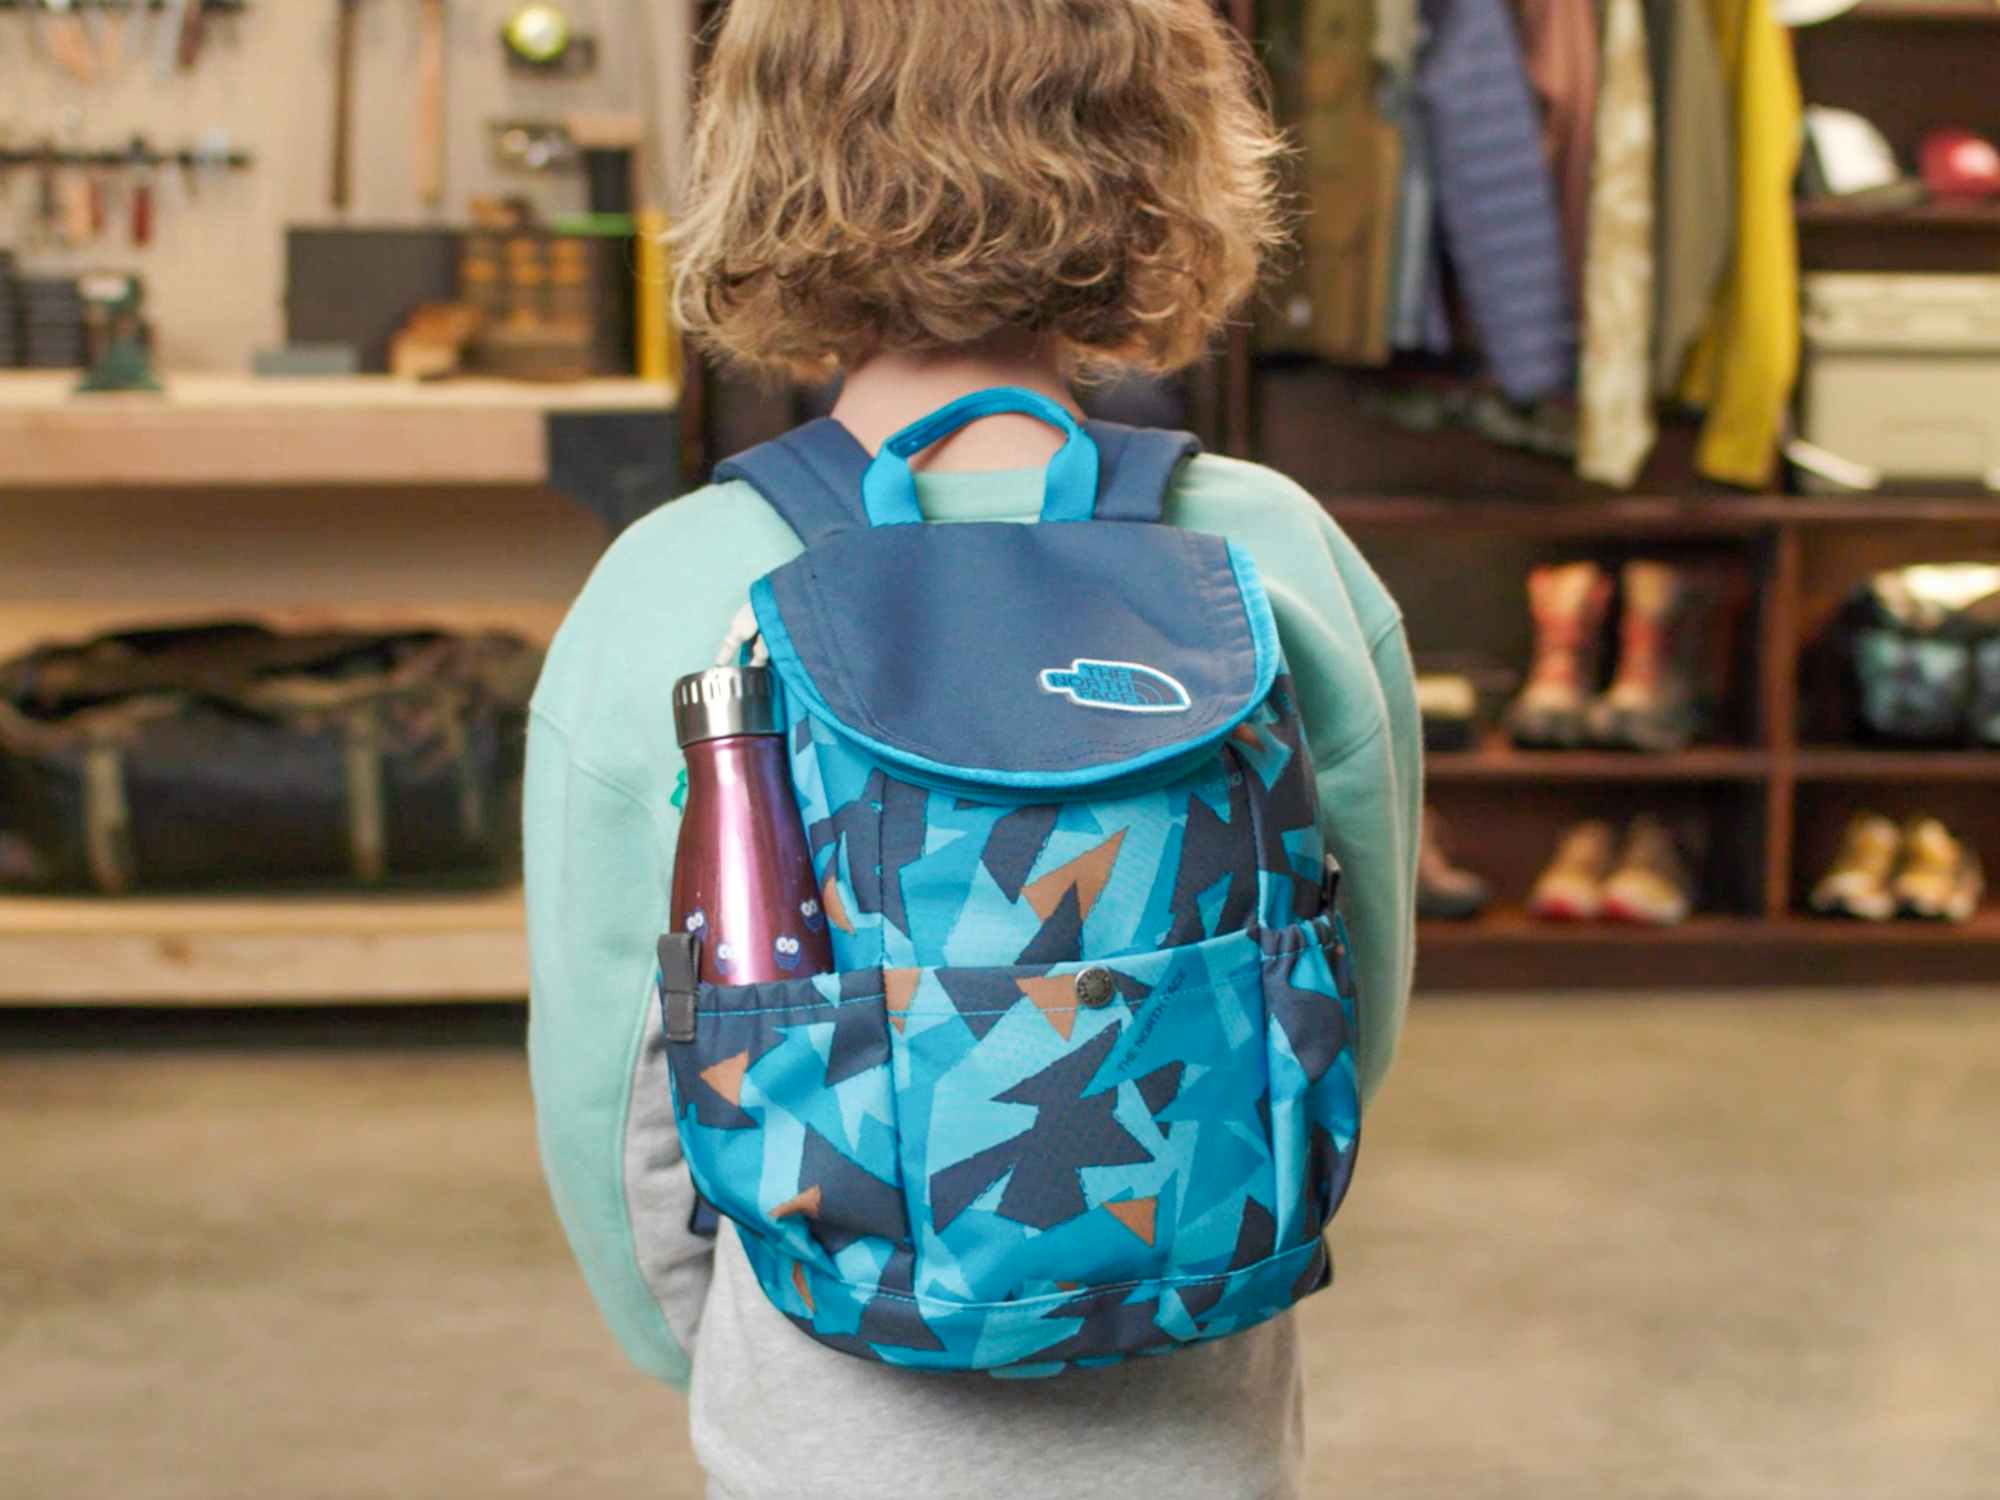 A child wearing a Youth Mini Explorer backpack from The North Face